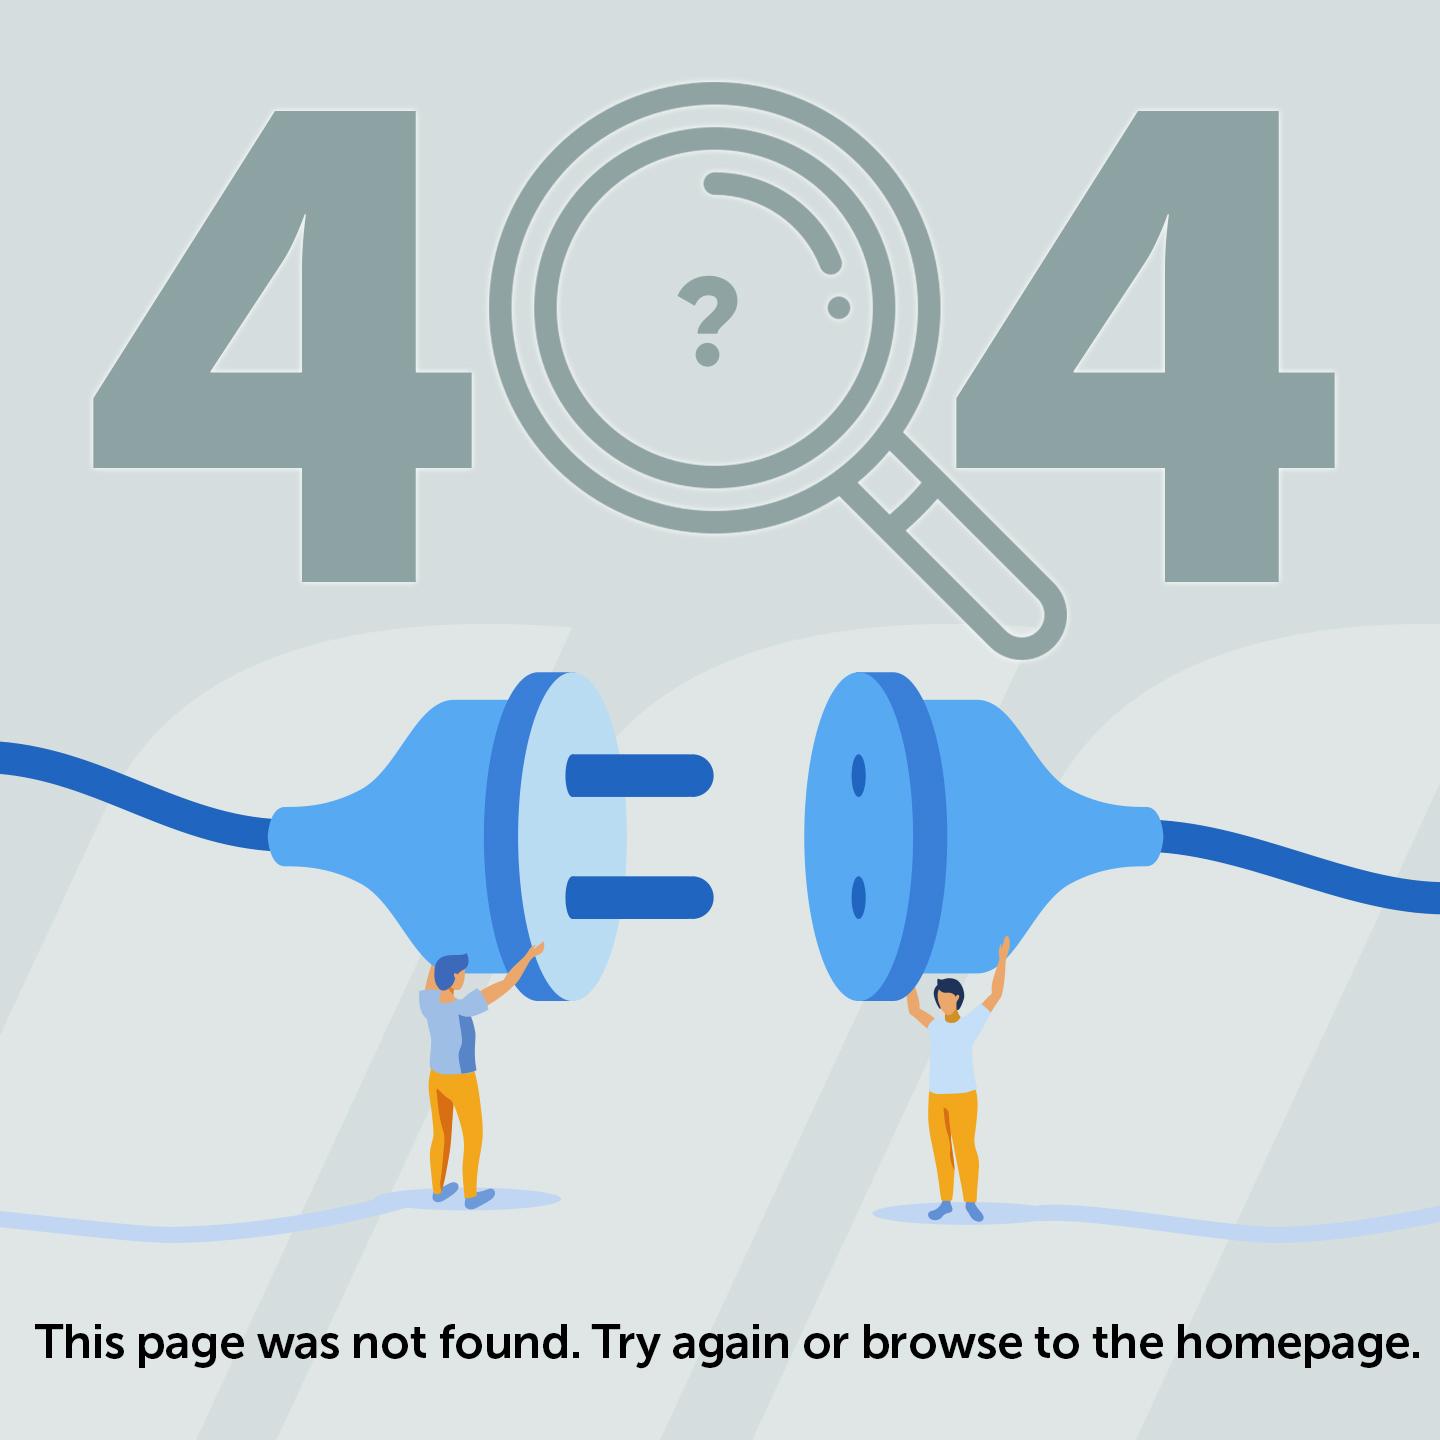 roxell-404-page-not-found